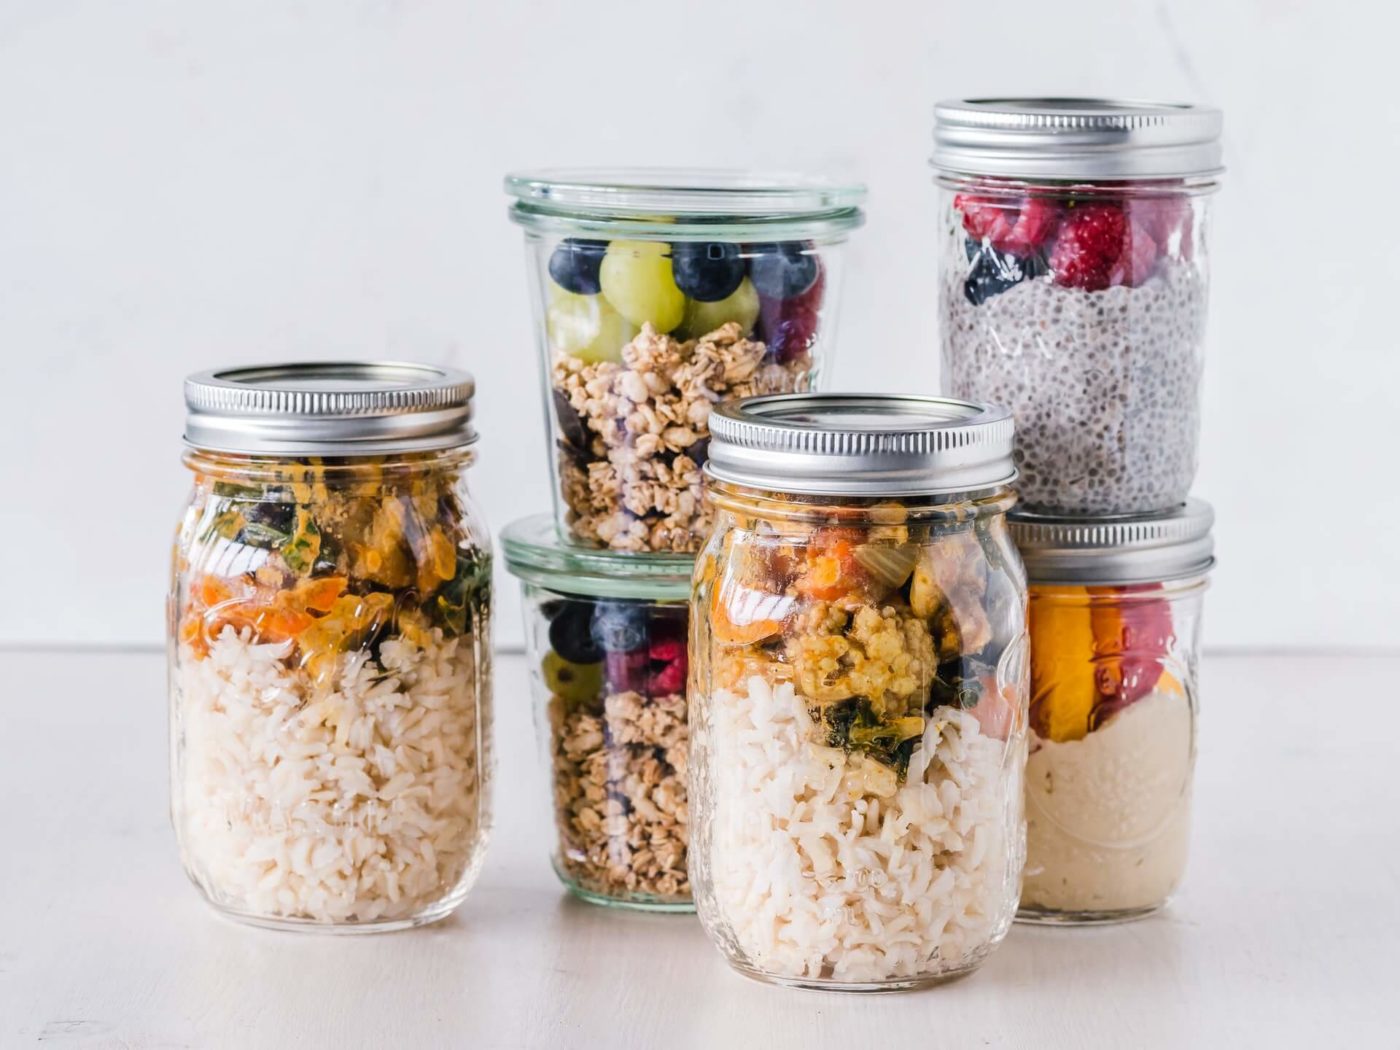 Perishable food packed in glass jars